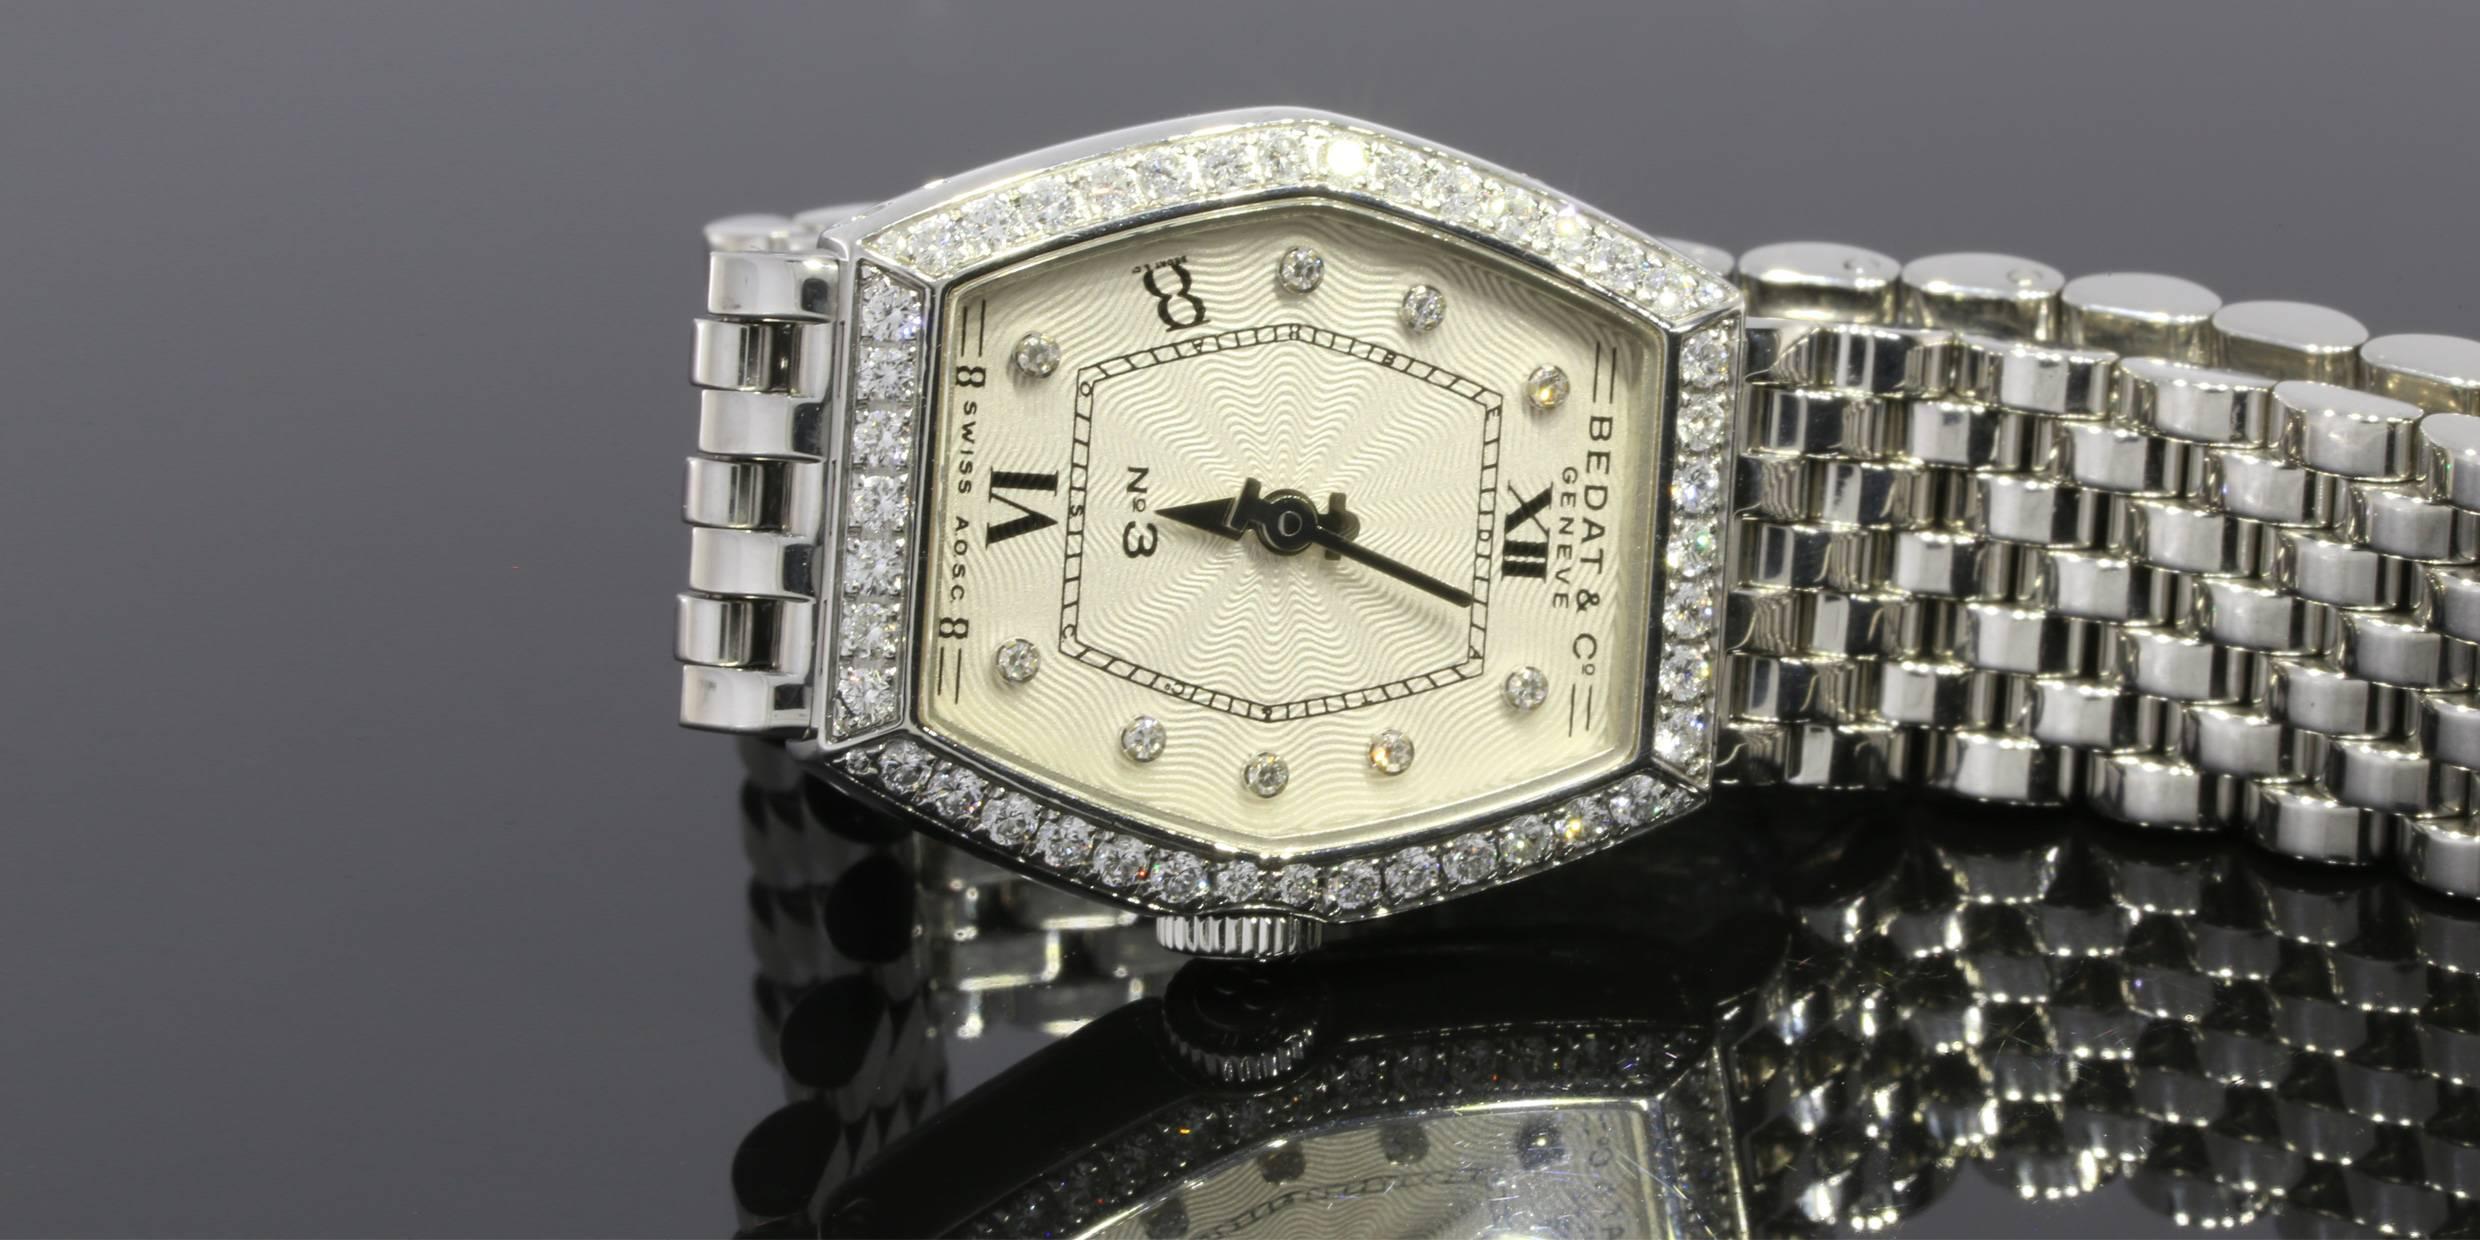 Bedat Lady's Stainless Steel No. 3 Diamond Bezel and Dial Wristwatch Ref. 306 1